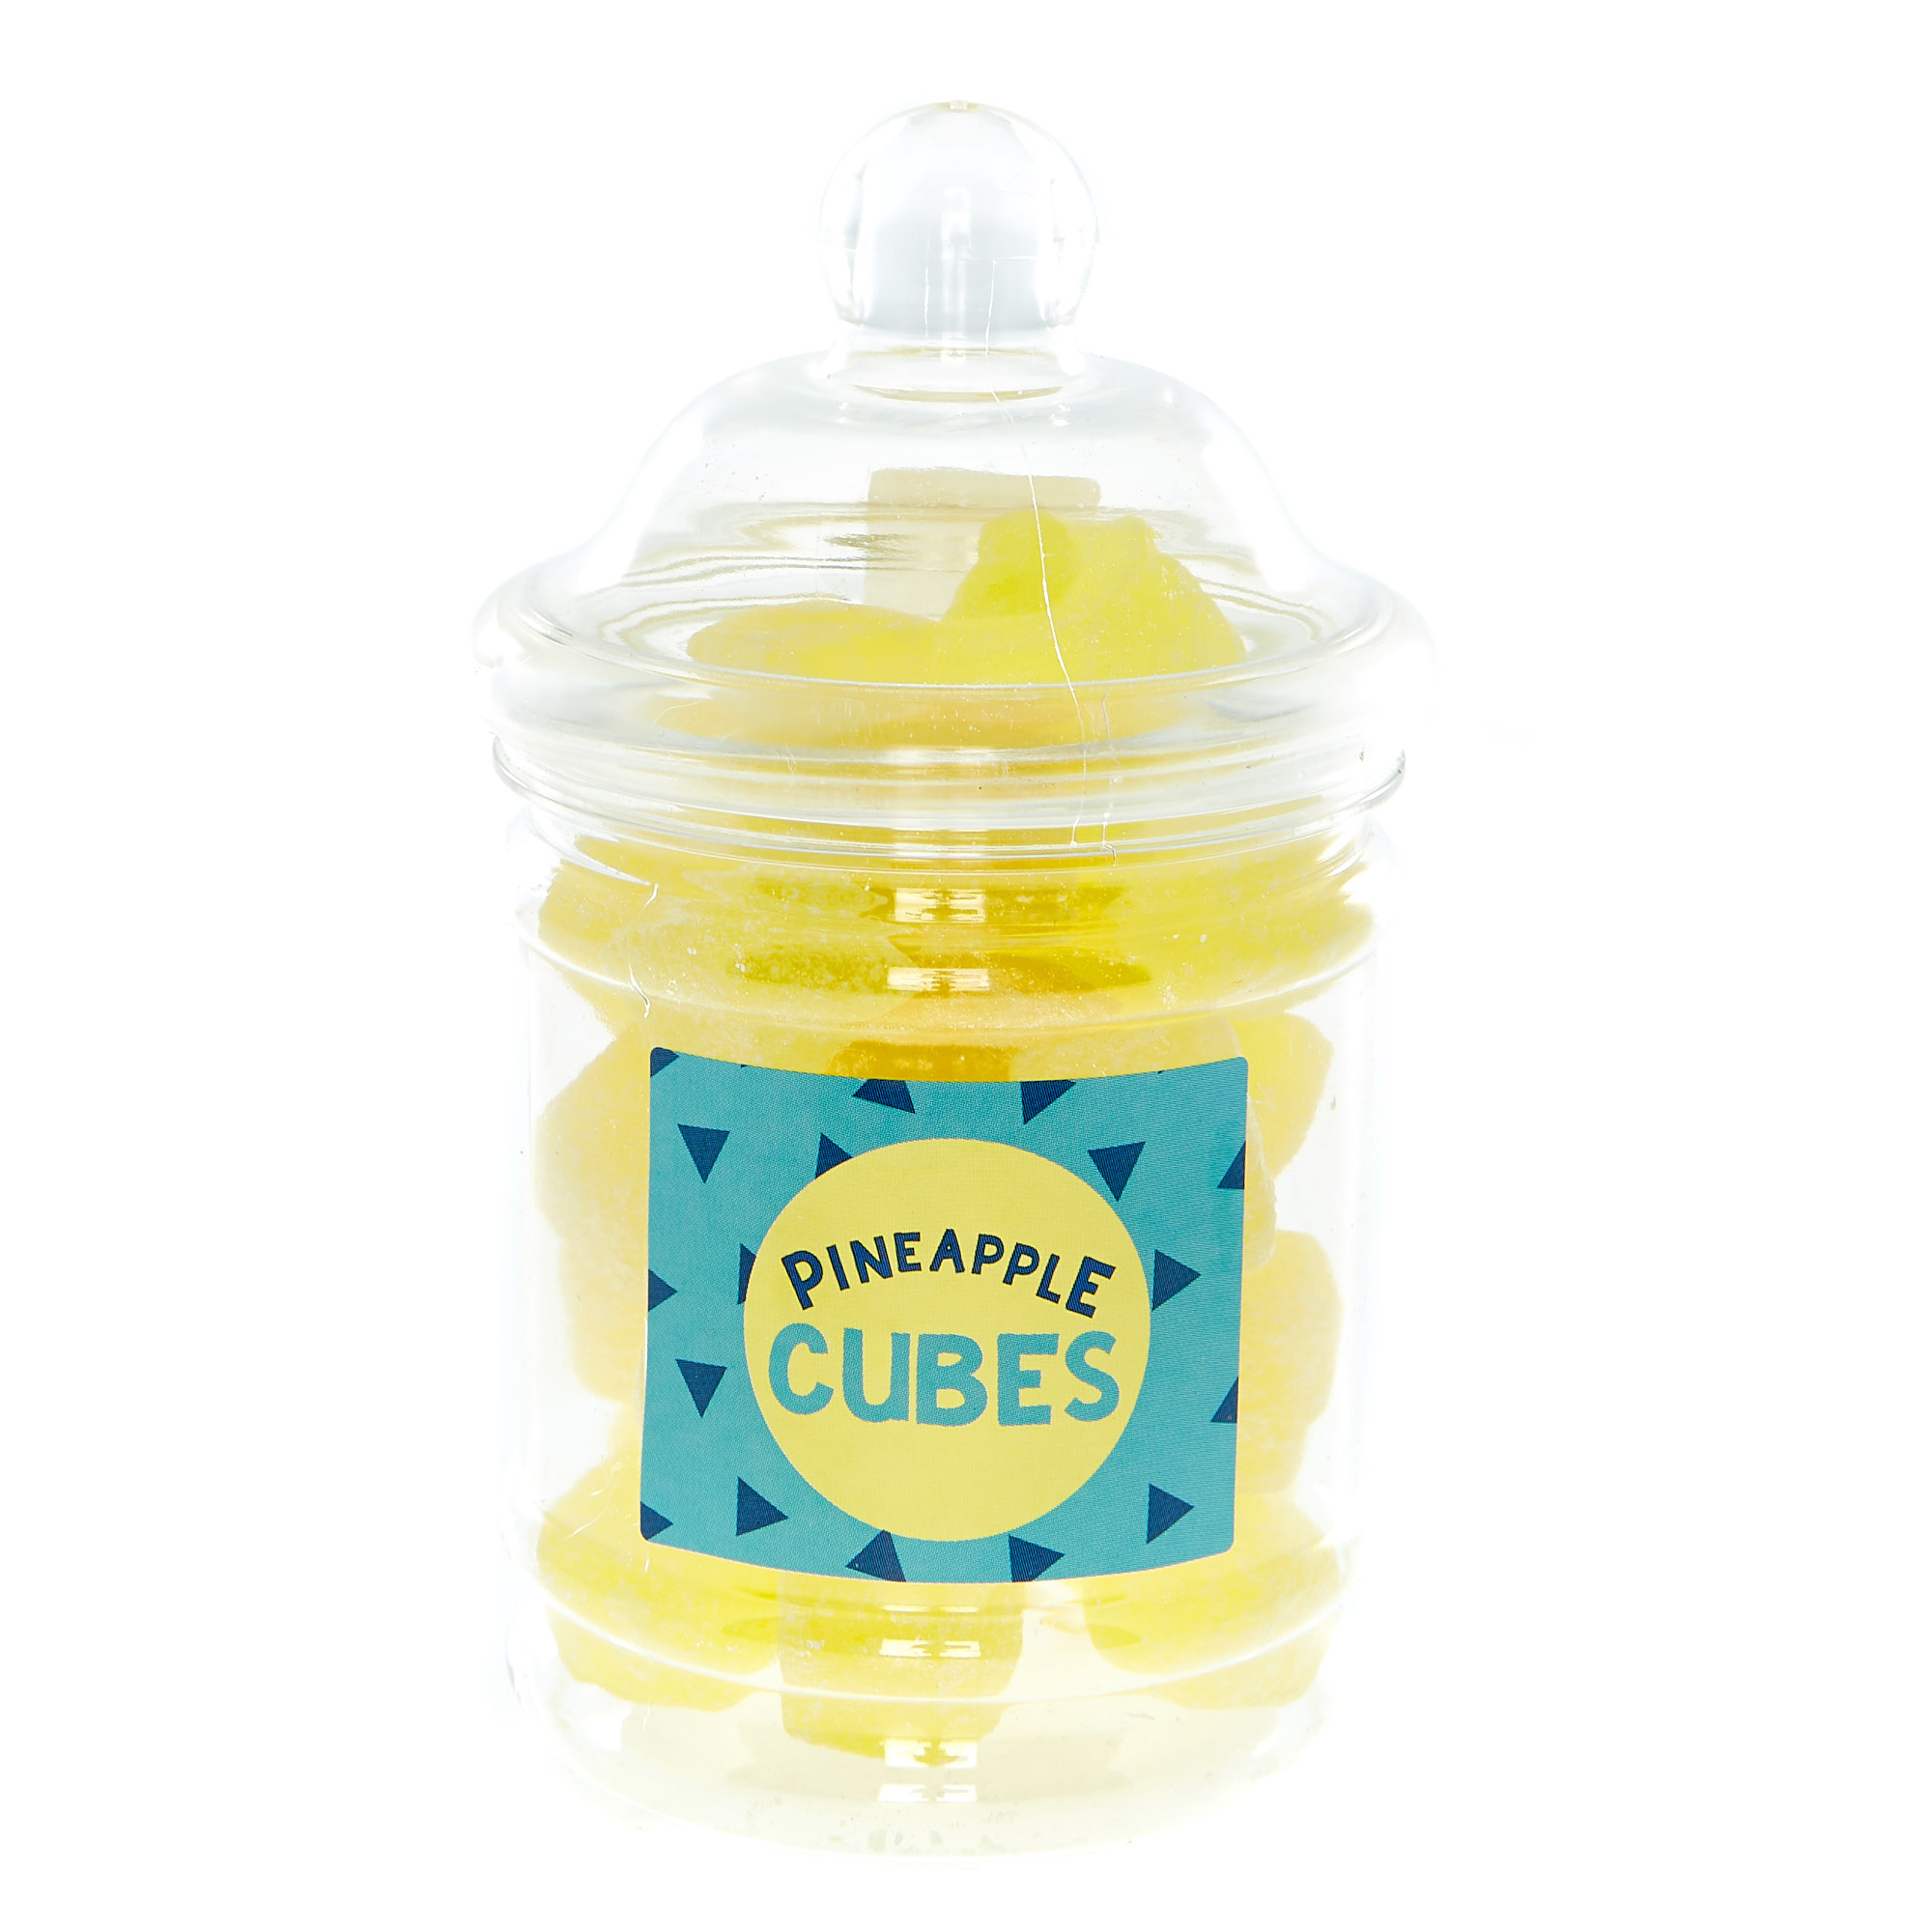 Pineapple Cubes Boiled Sweets In A Jar